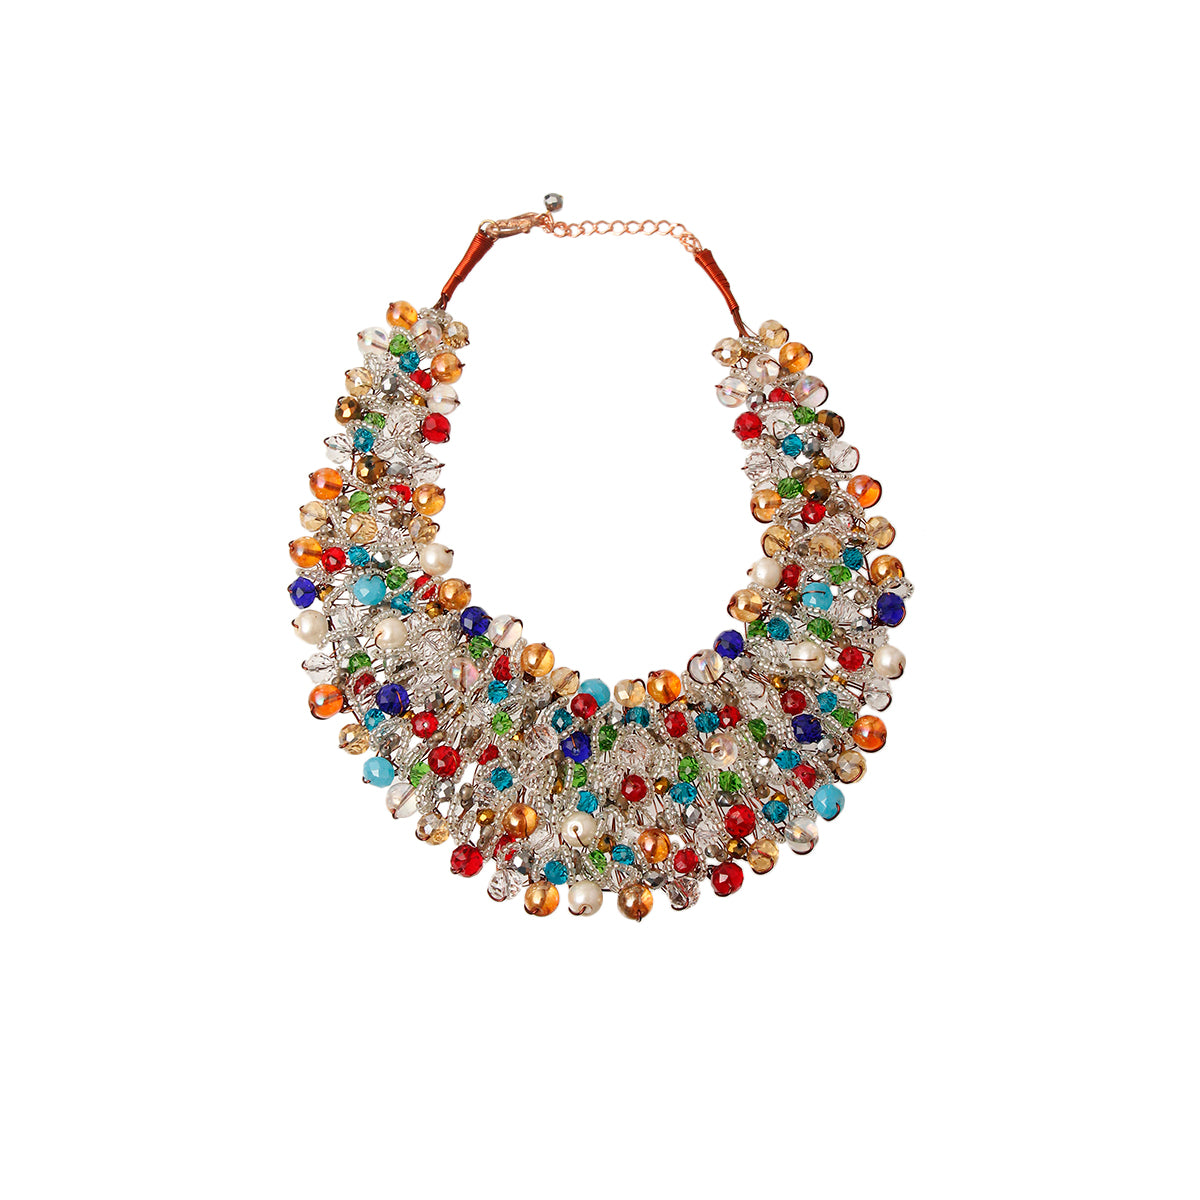 Bead and Copper Bib Necklace